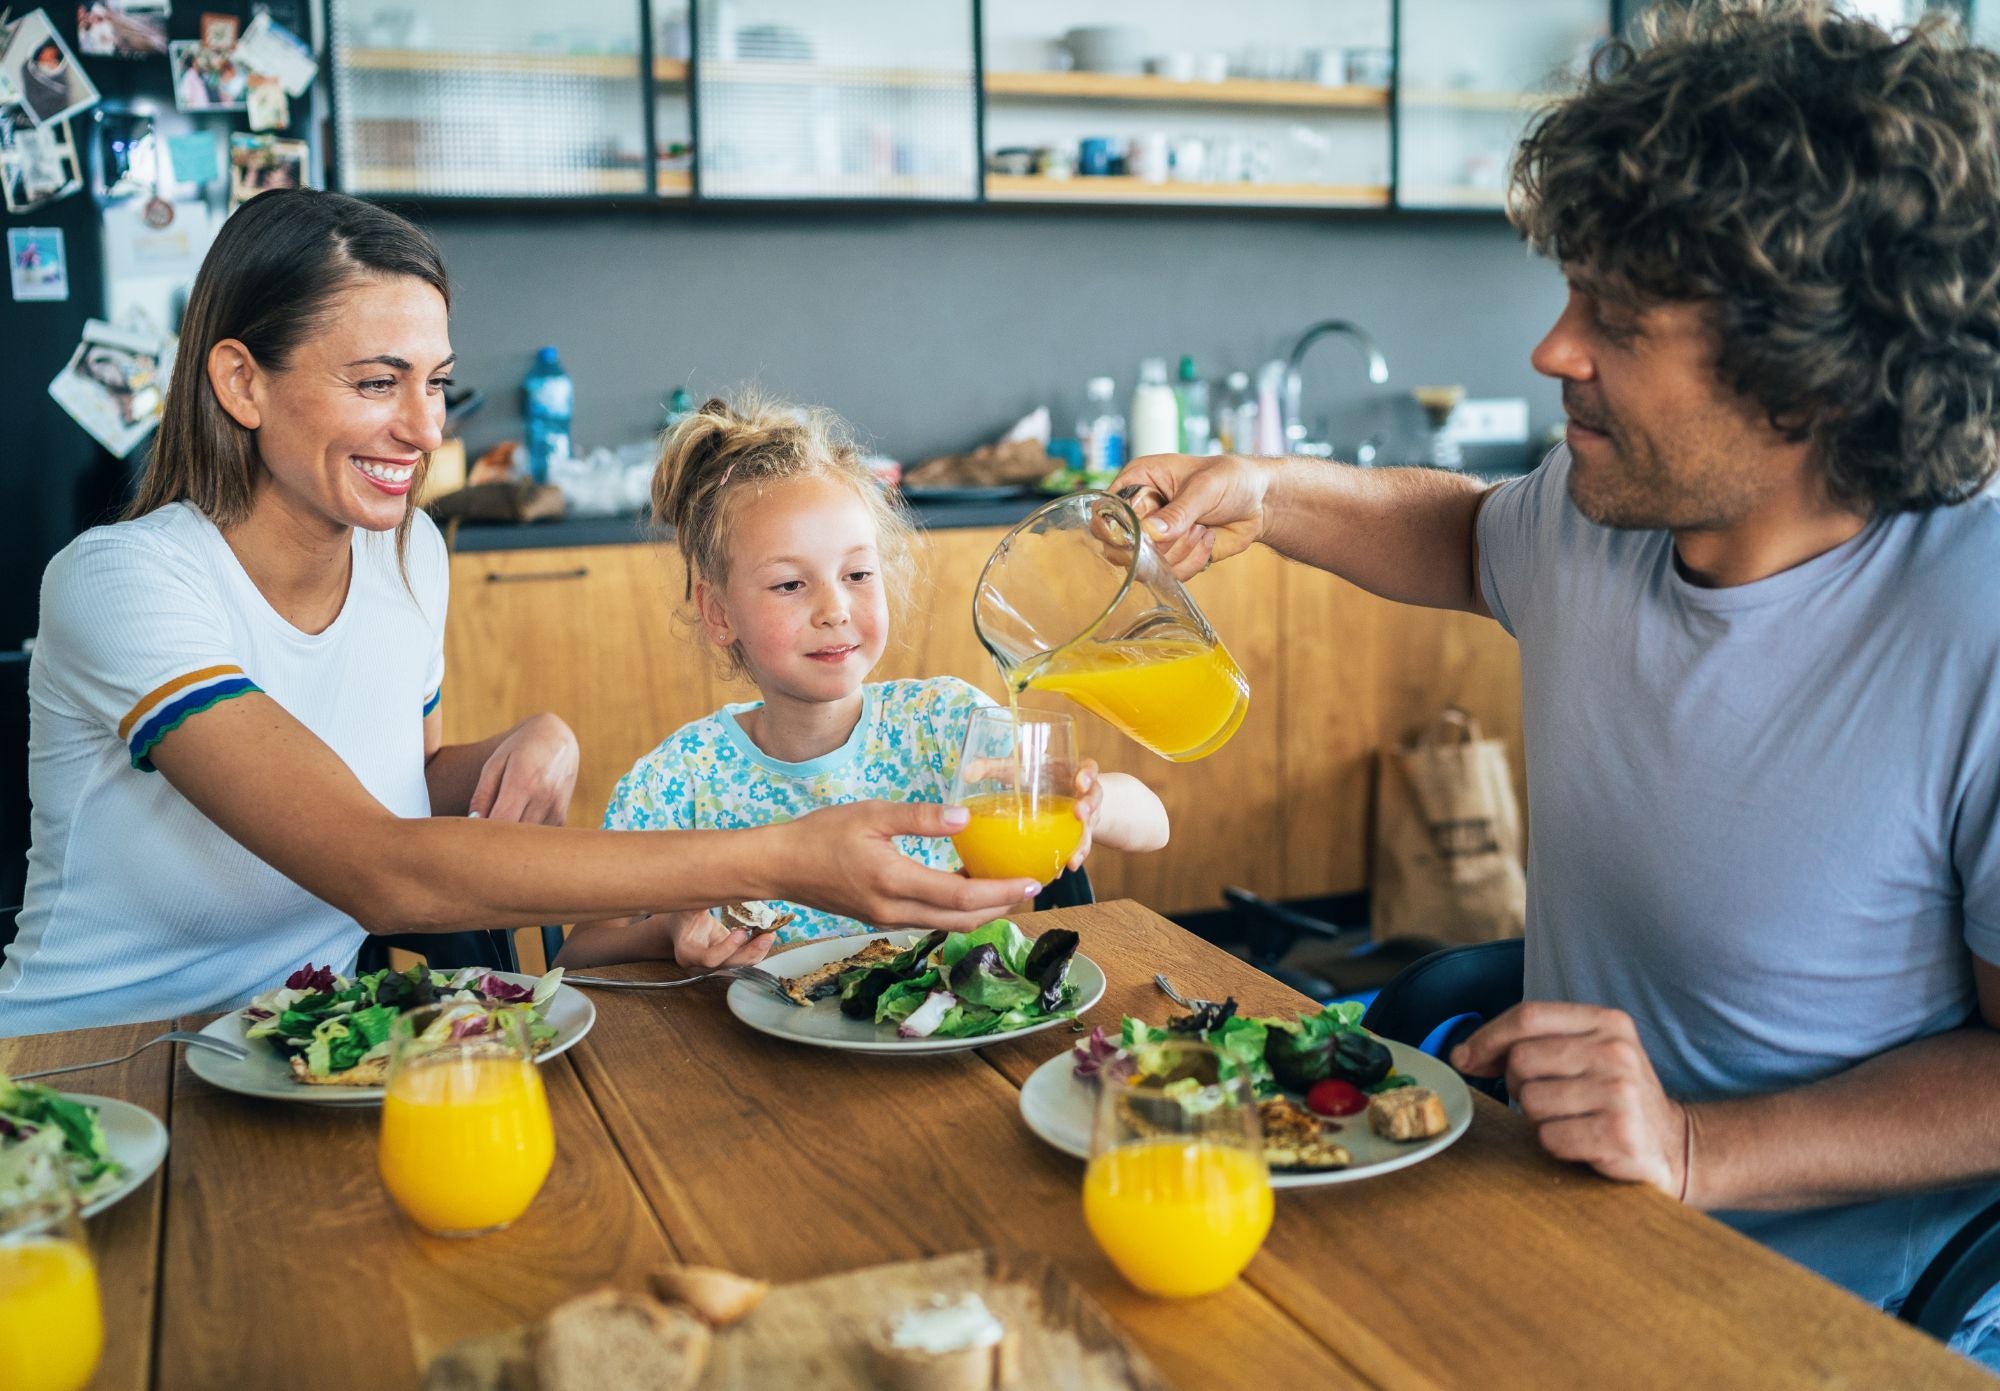 5 Ways to Encourage Your Family to Live a Healthy Lifestyle